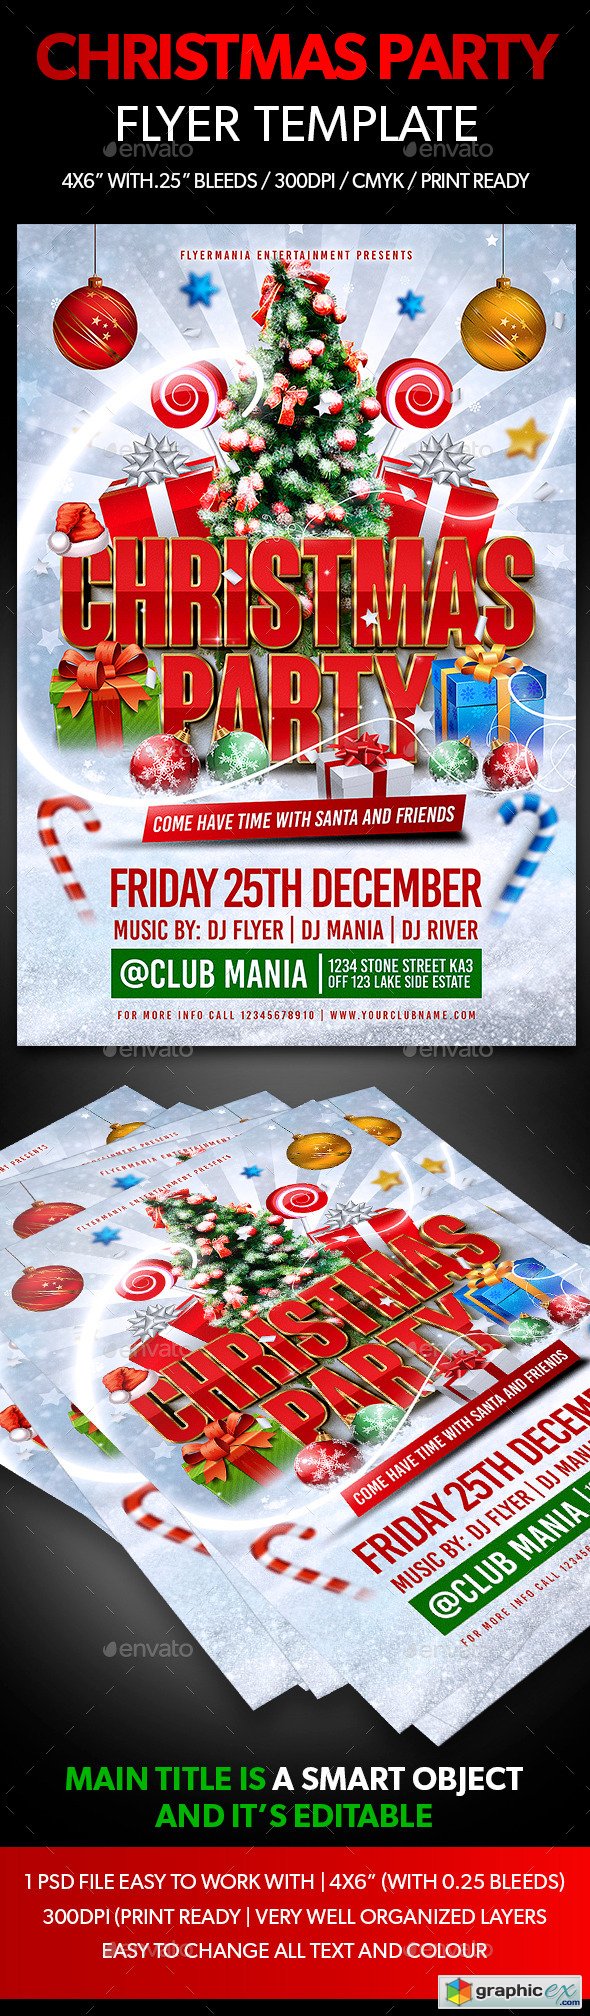 Christmas Party Flyer Template 9455114